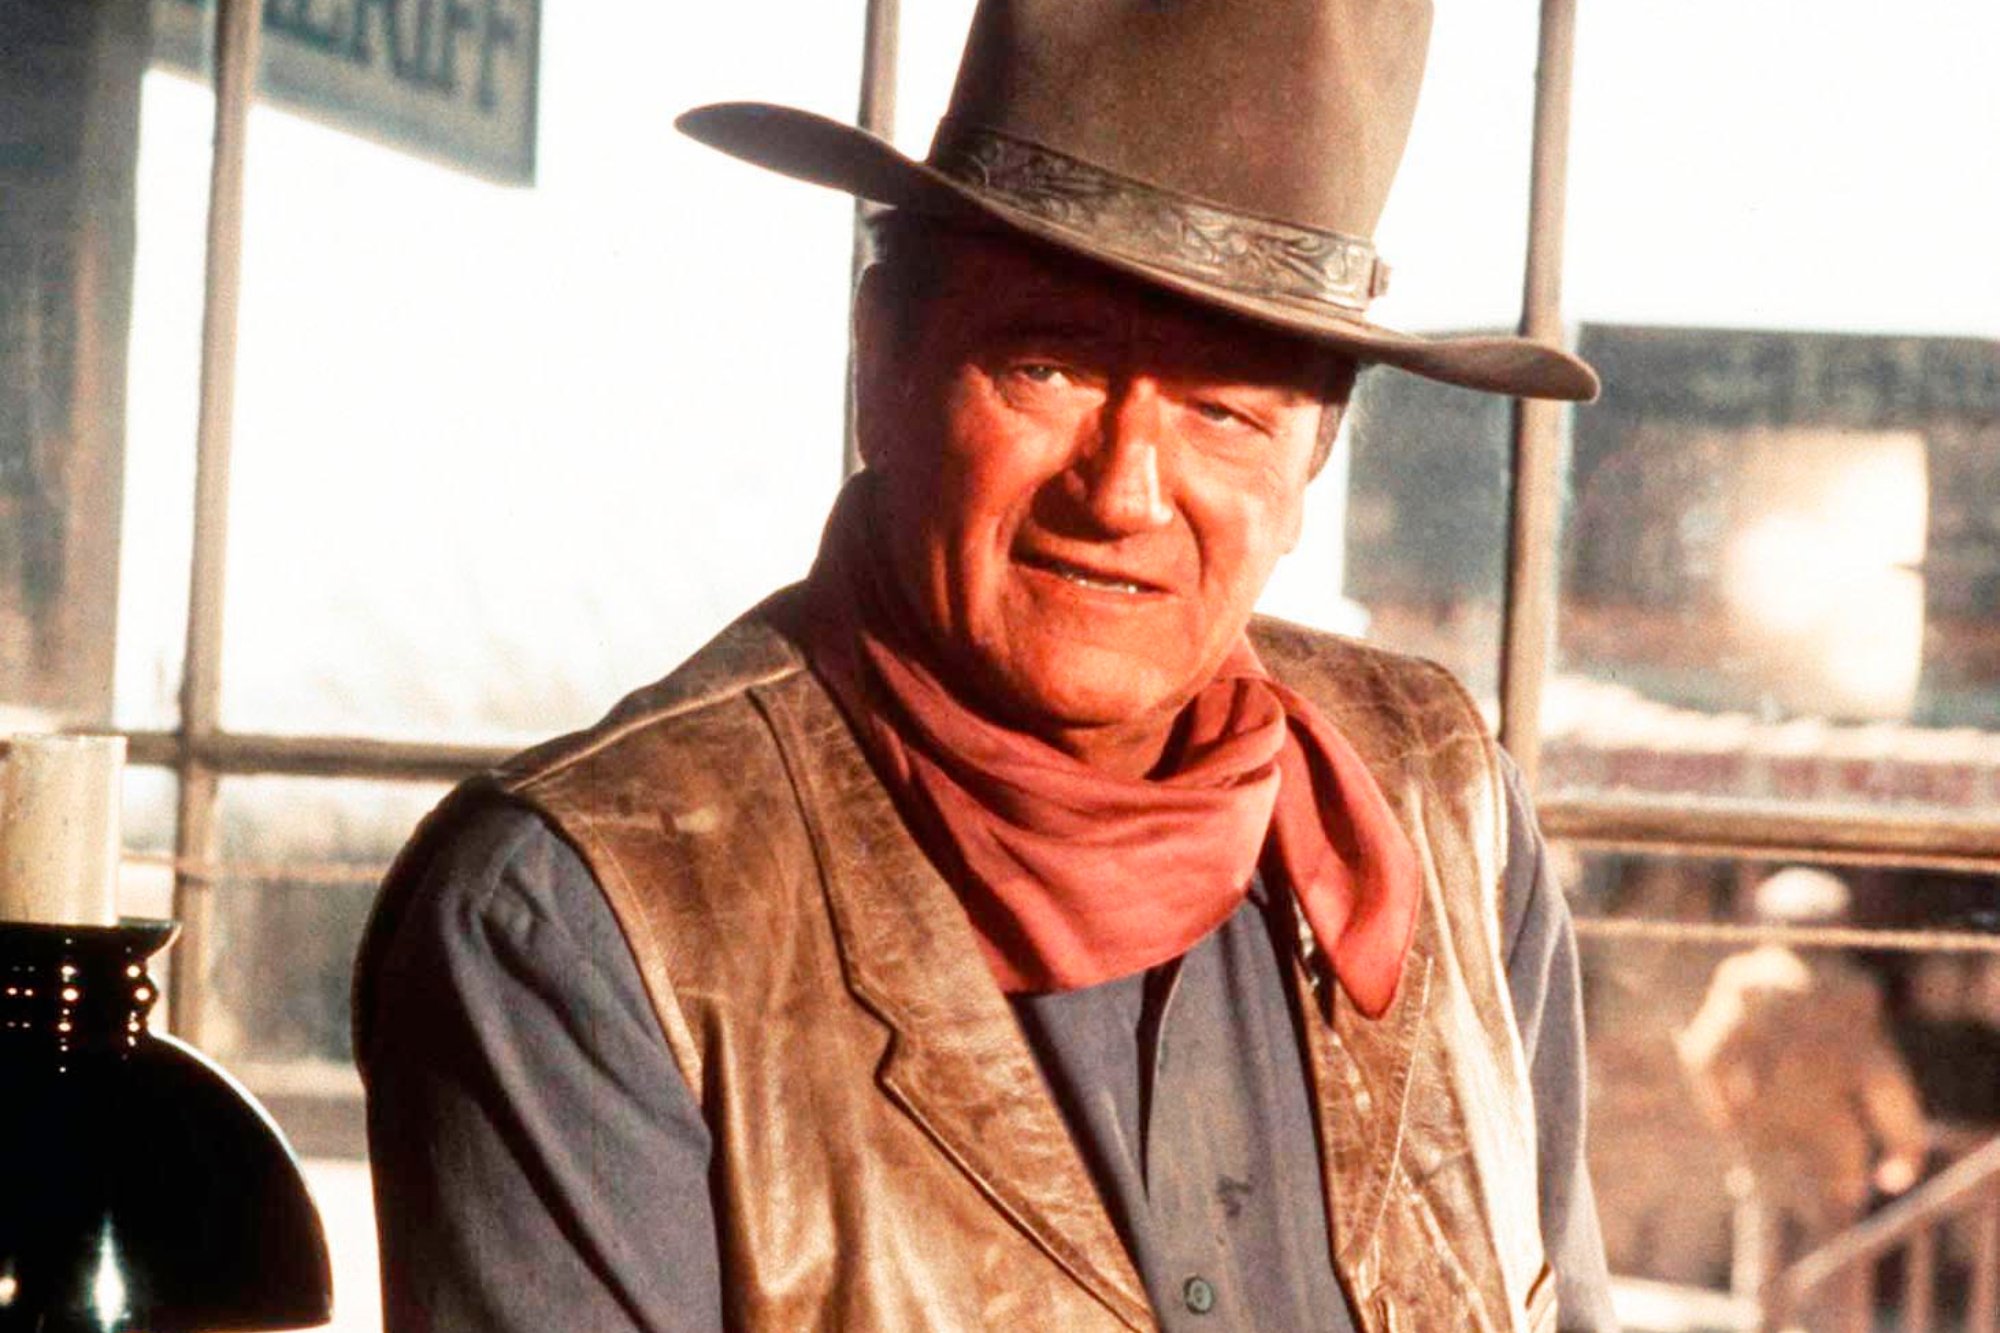 John Wayne, who had an iconic walk. He has a serious look on his face, wearing a Western cowboy outfit with a scarf, leather vest, and hat.